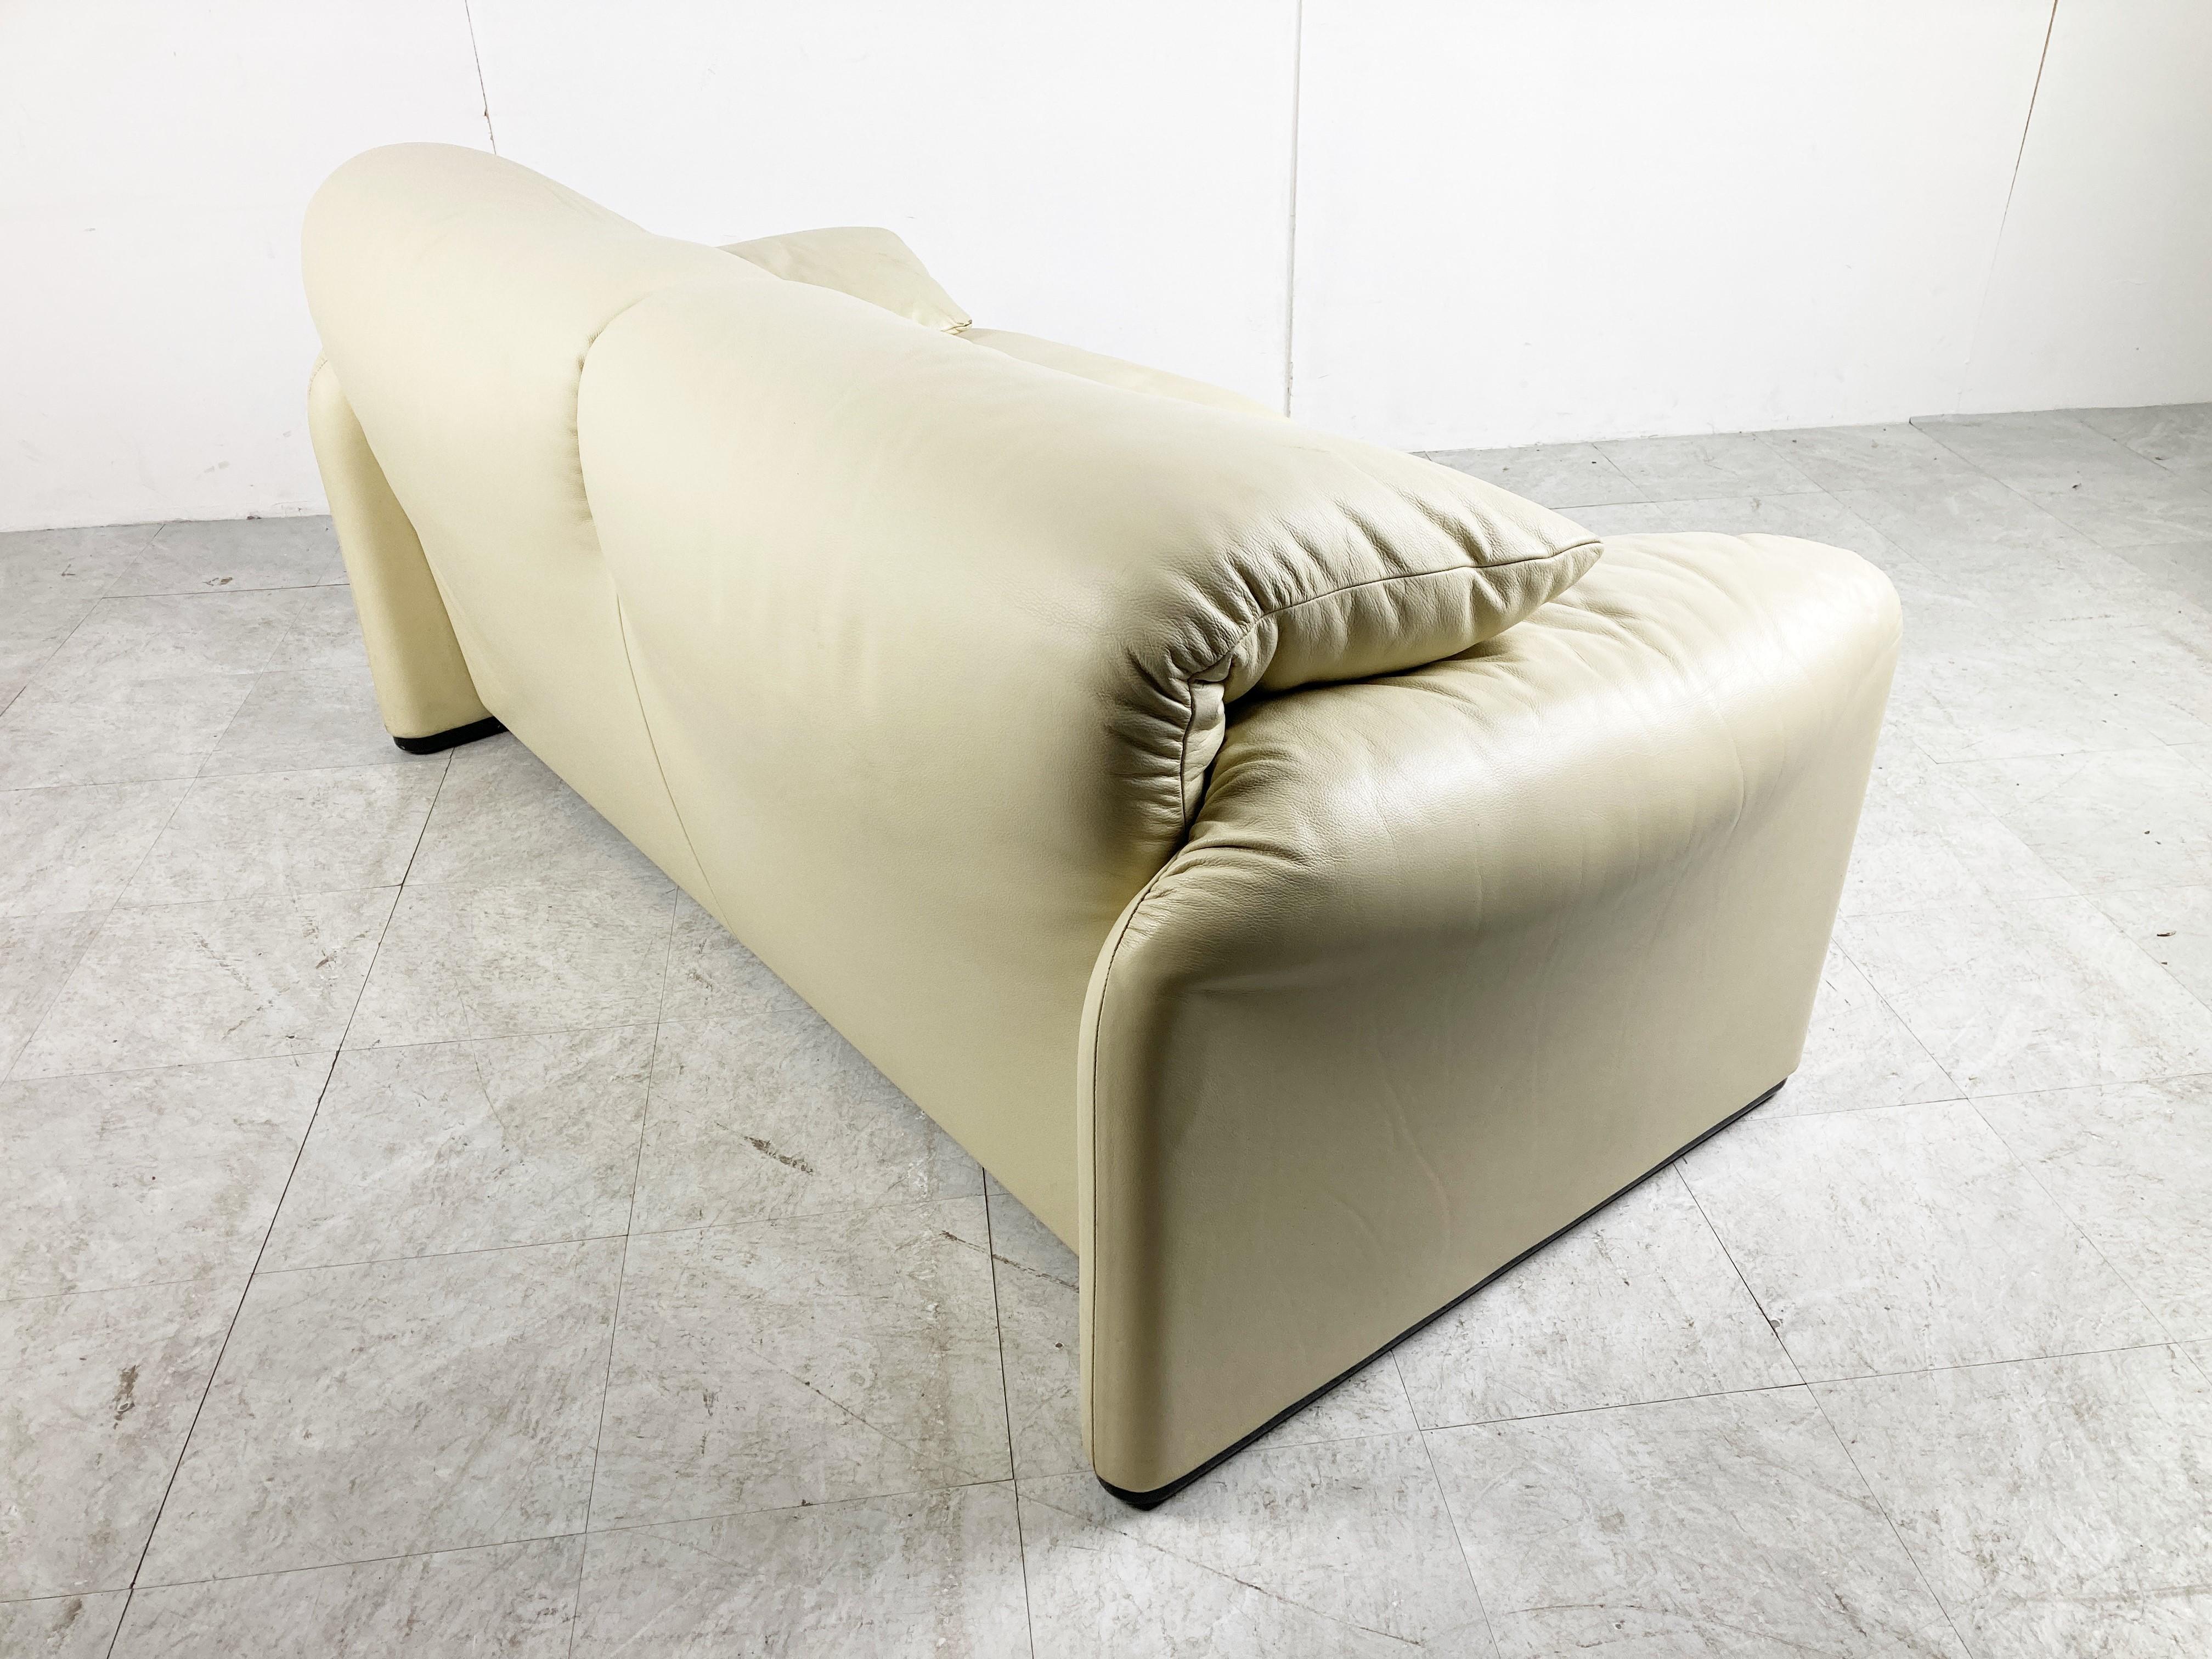 Vintage white/beige leather maralunga sofa designed by Vico Magistretti for Cassina in 1973.

Iconic design sofa with a timeless look.

The backrests are adjustable..

Good condition, one of the seat cushions have a slightly different